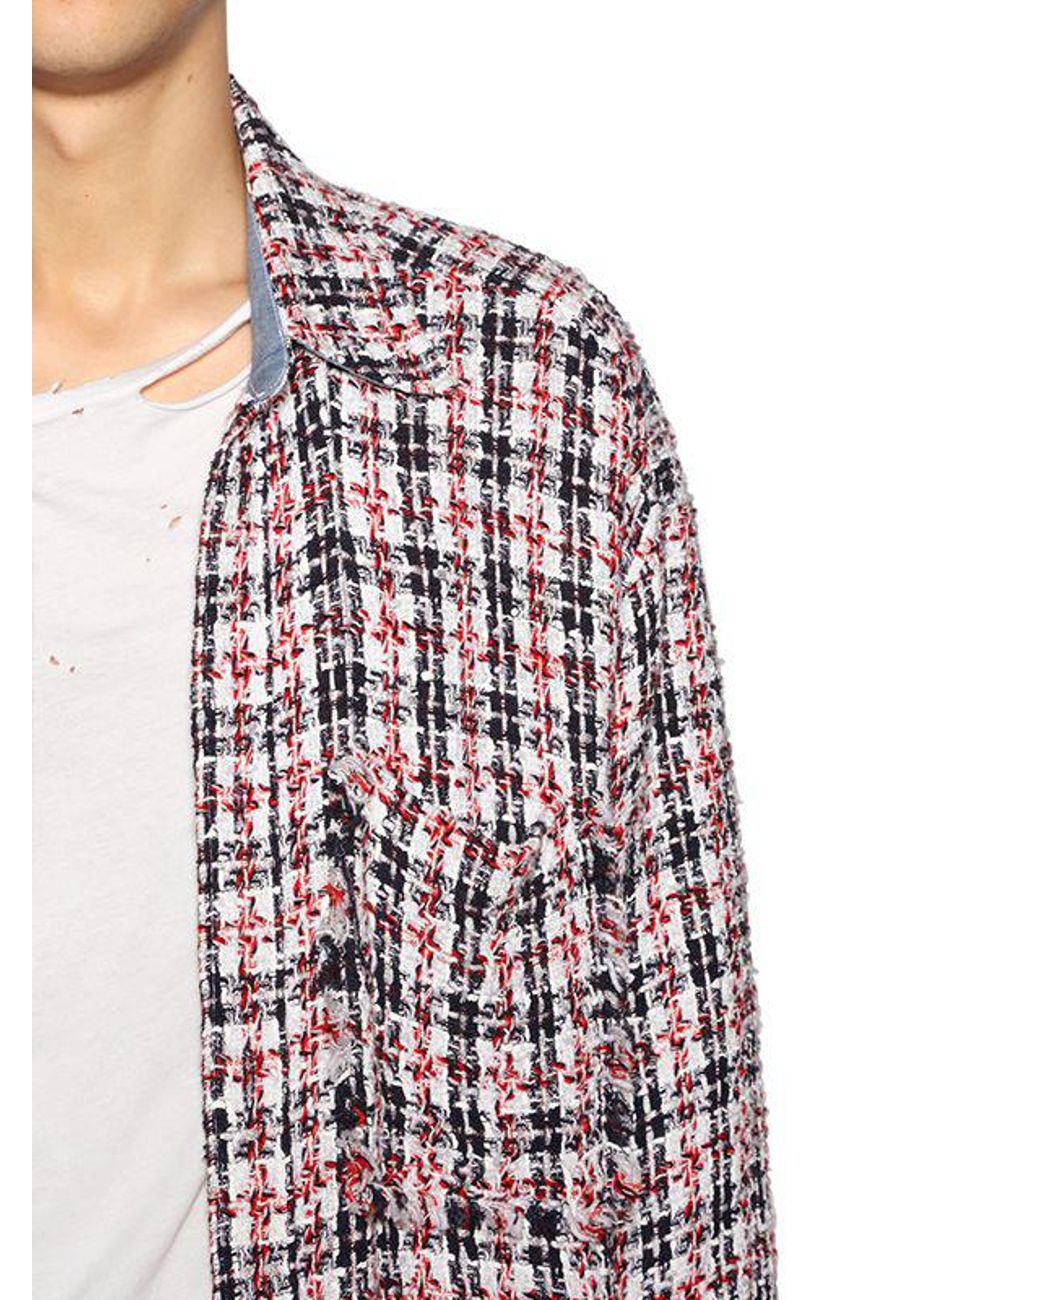 Faith Connexion Oversized Raw Cut Tweed Shirt in Navy/Red (Red 